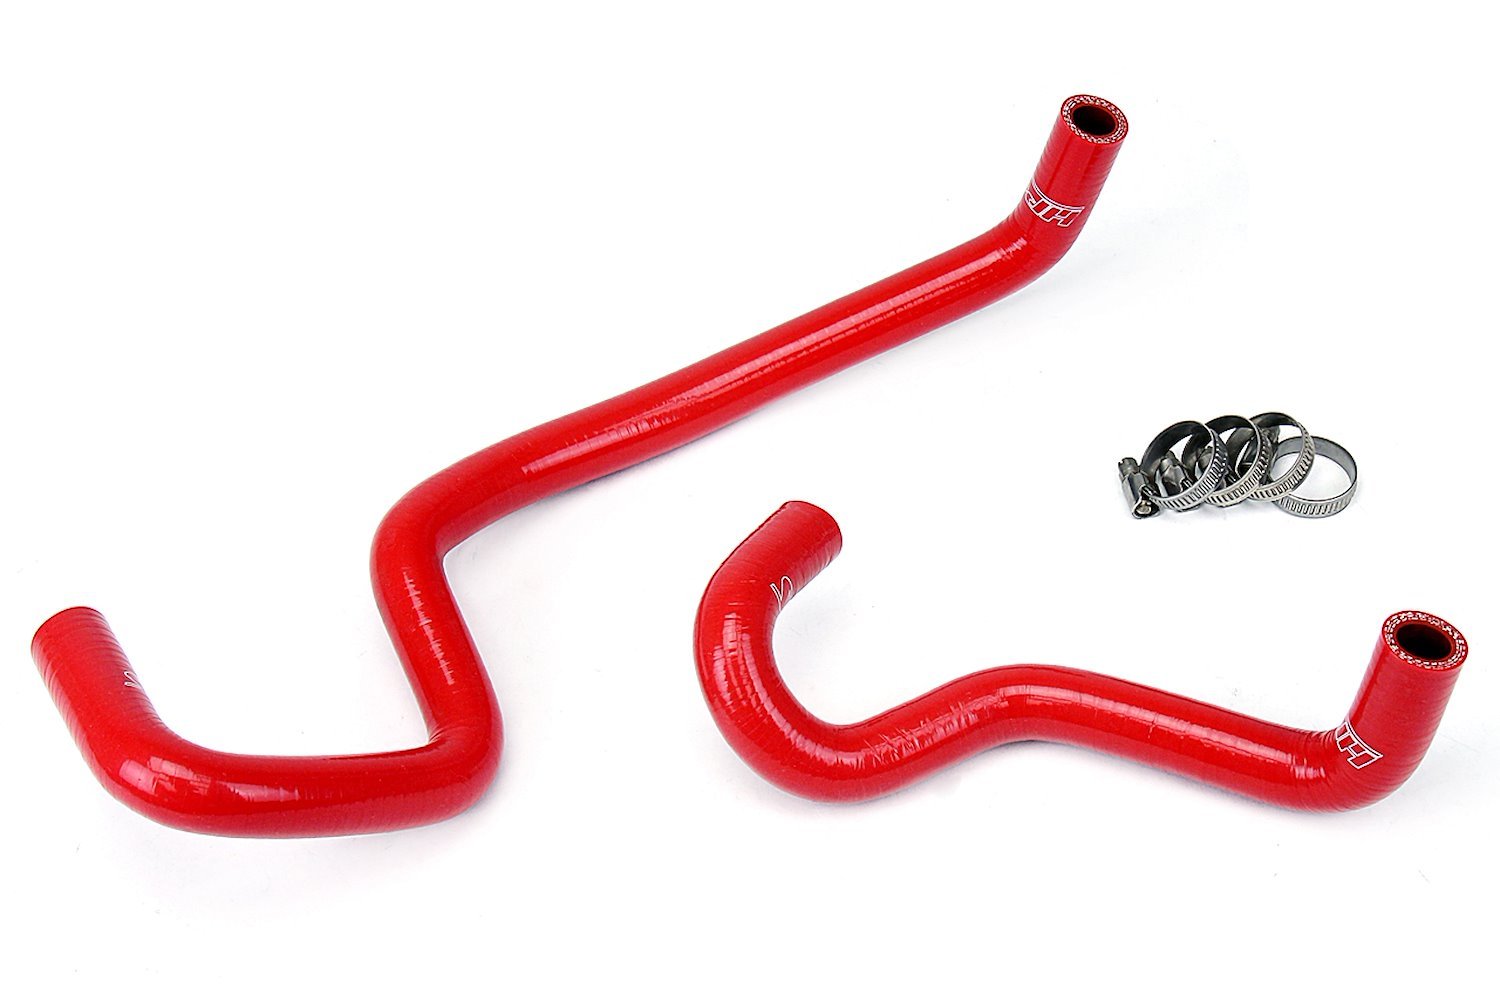 57-1467H-RED Heater Hose Kit, High-Temp 3-Ply Reinforced Silicone, Replace OEM Rubber Heater Coolant Hoses